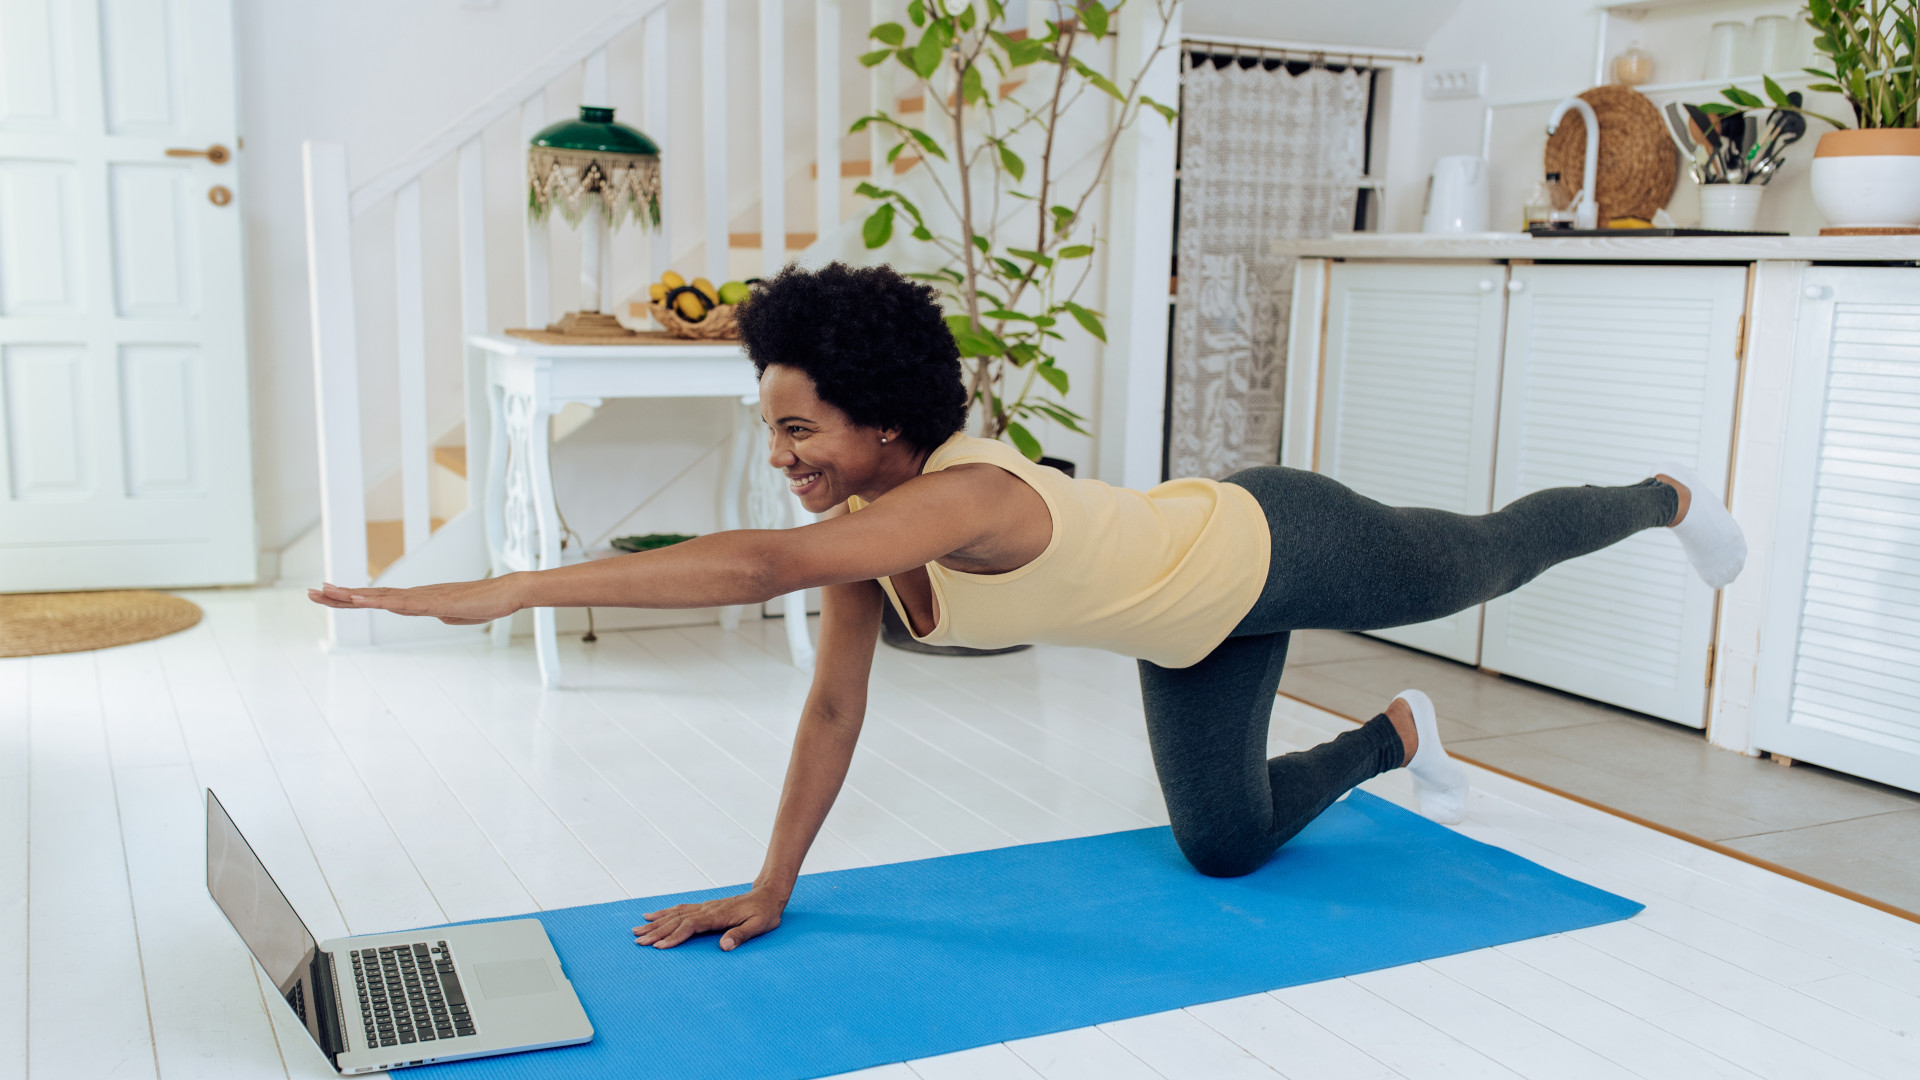 Yoga for Glutes: A 7-Pose Home Practice Pilates Hybrid